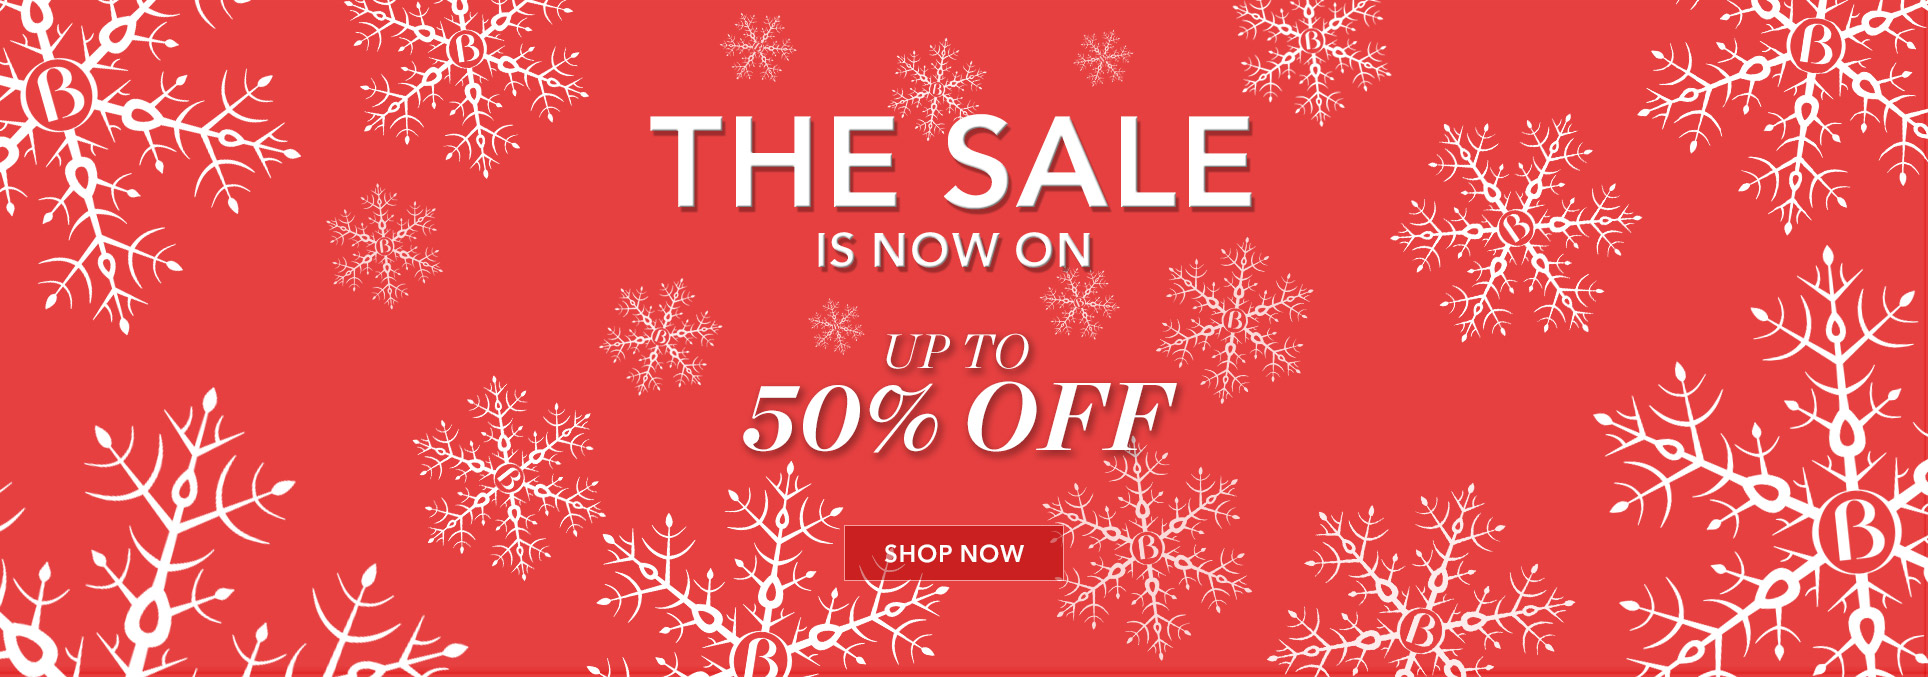 Save up to 60% OFF on sale styles